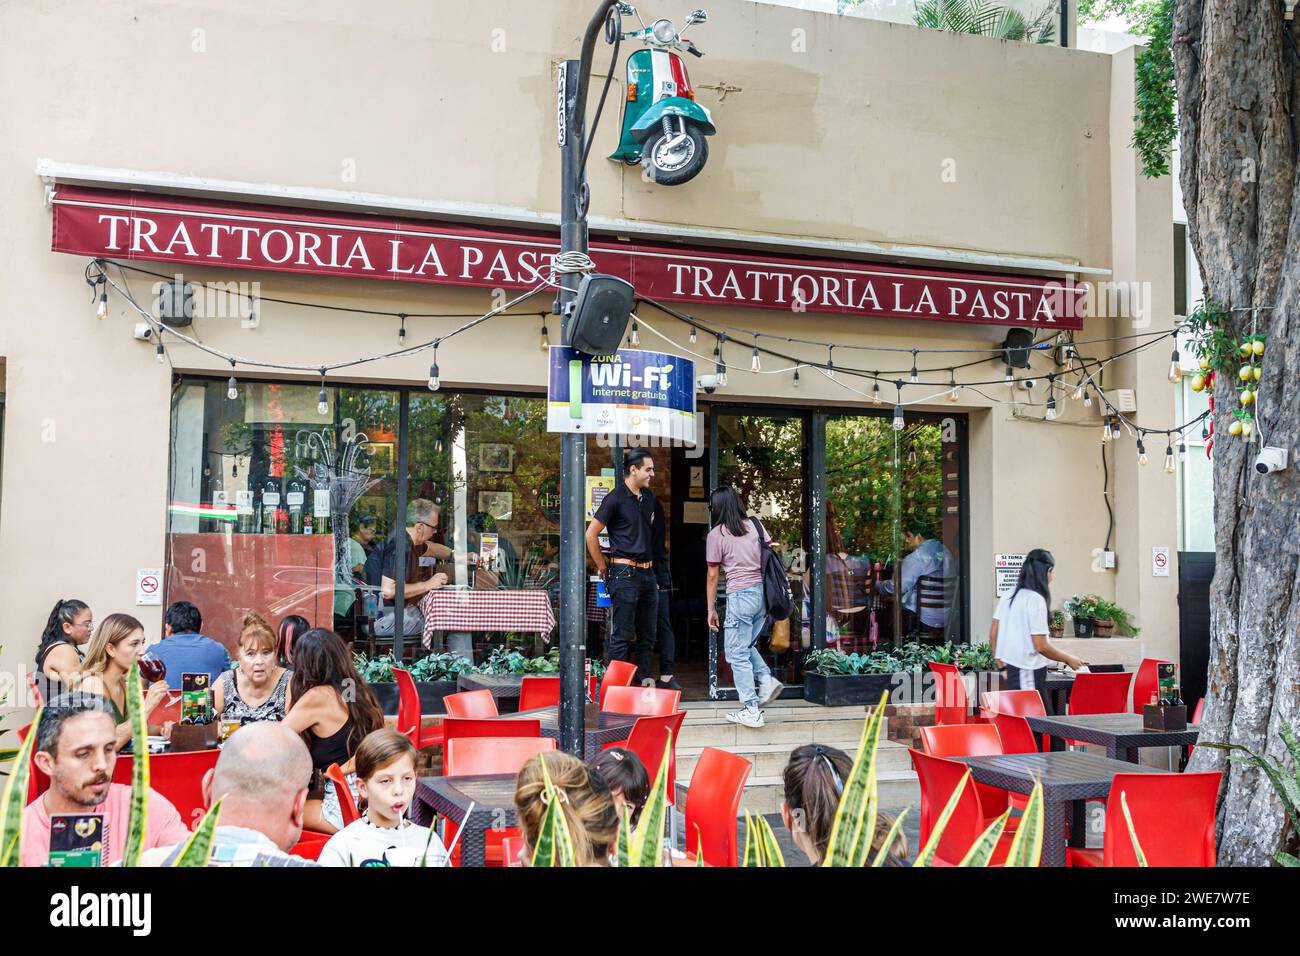 Merida Mexico,Zona Paseo Montejo Centro,Trattoria La Pasta Italian restaurant dine dining eating out,casual cafe bistro food,business,restaurants cafe Stock Photo